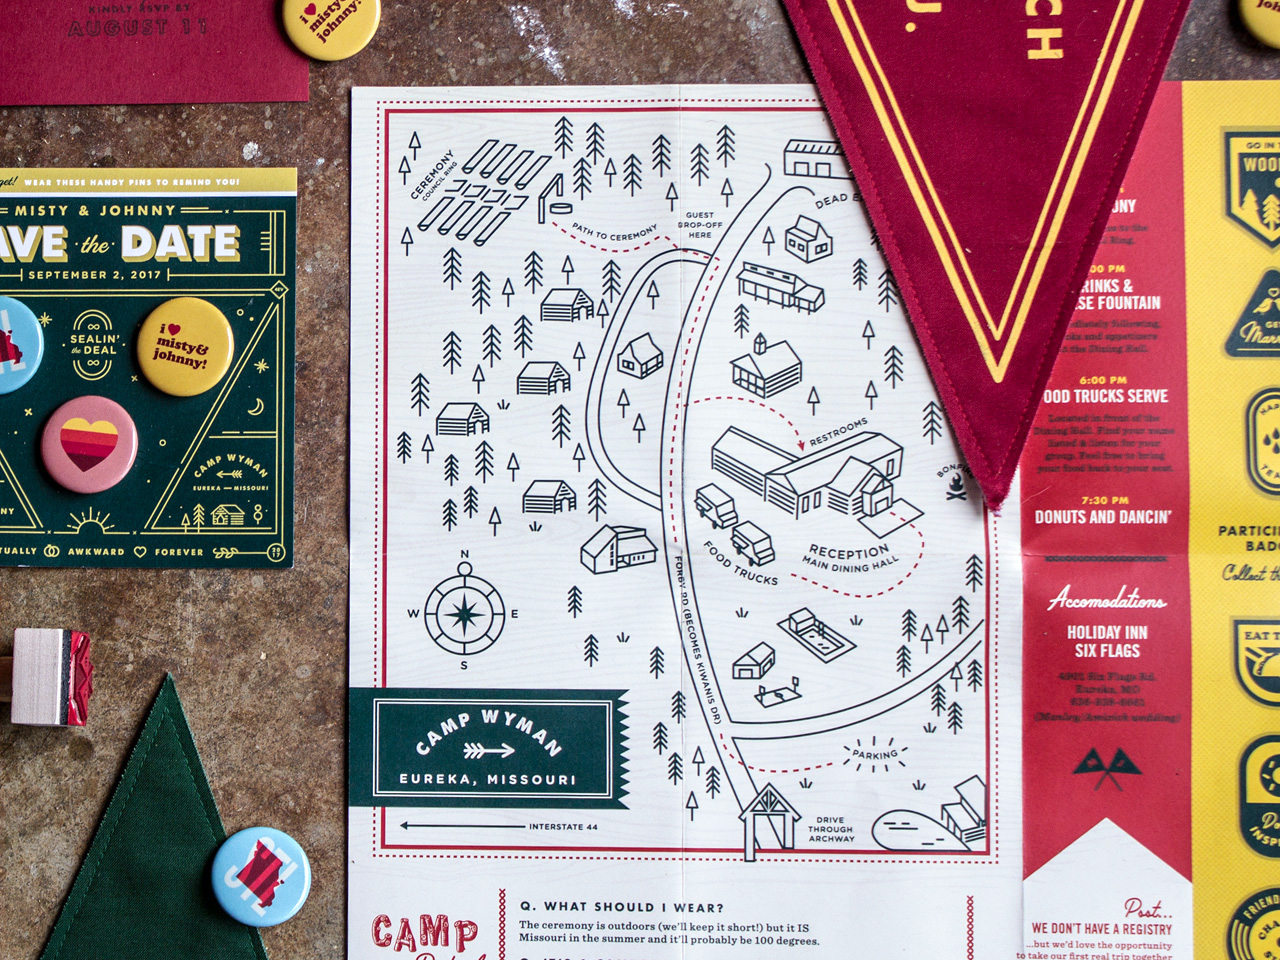 Quirky Camp-Theme Wedding Invitations by Misty Manley